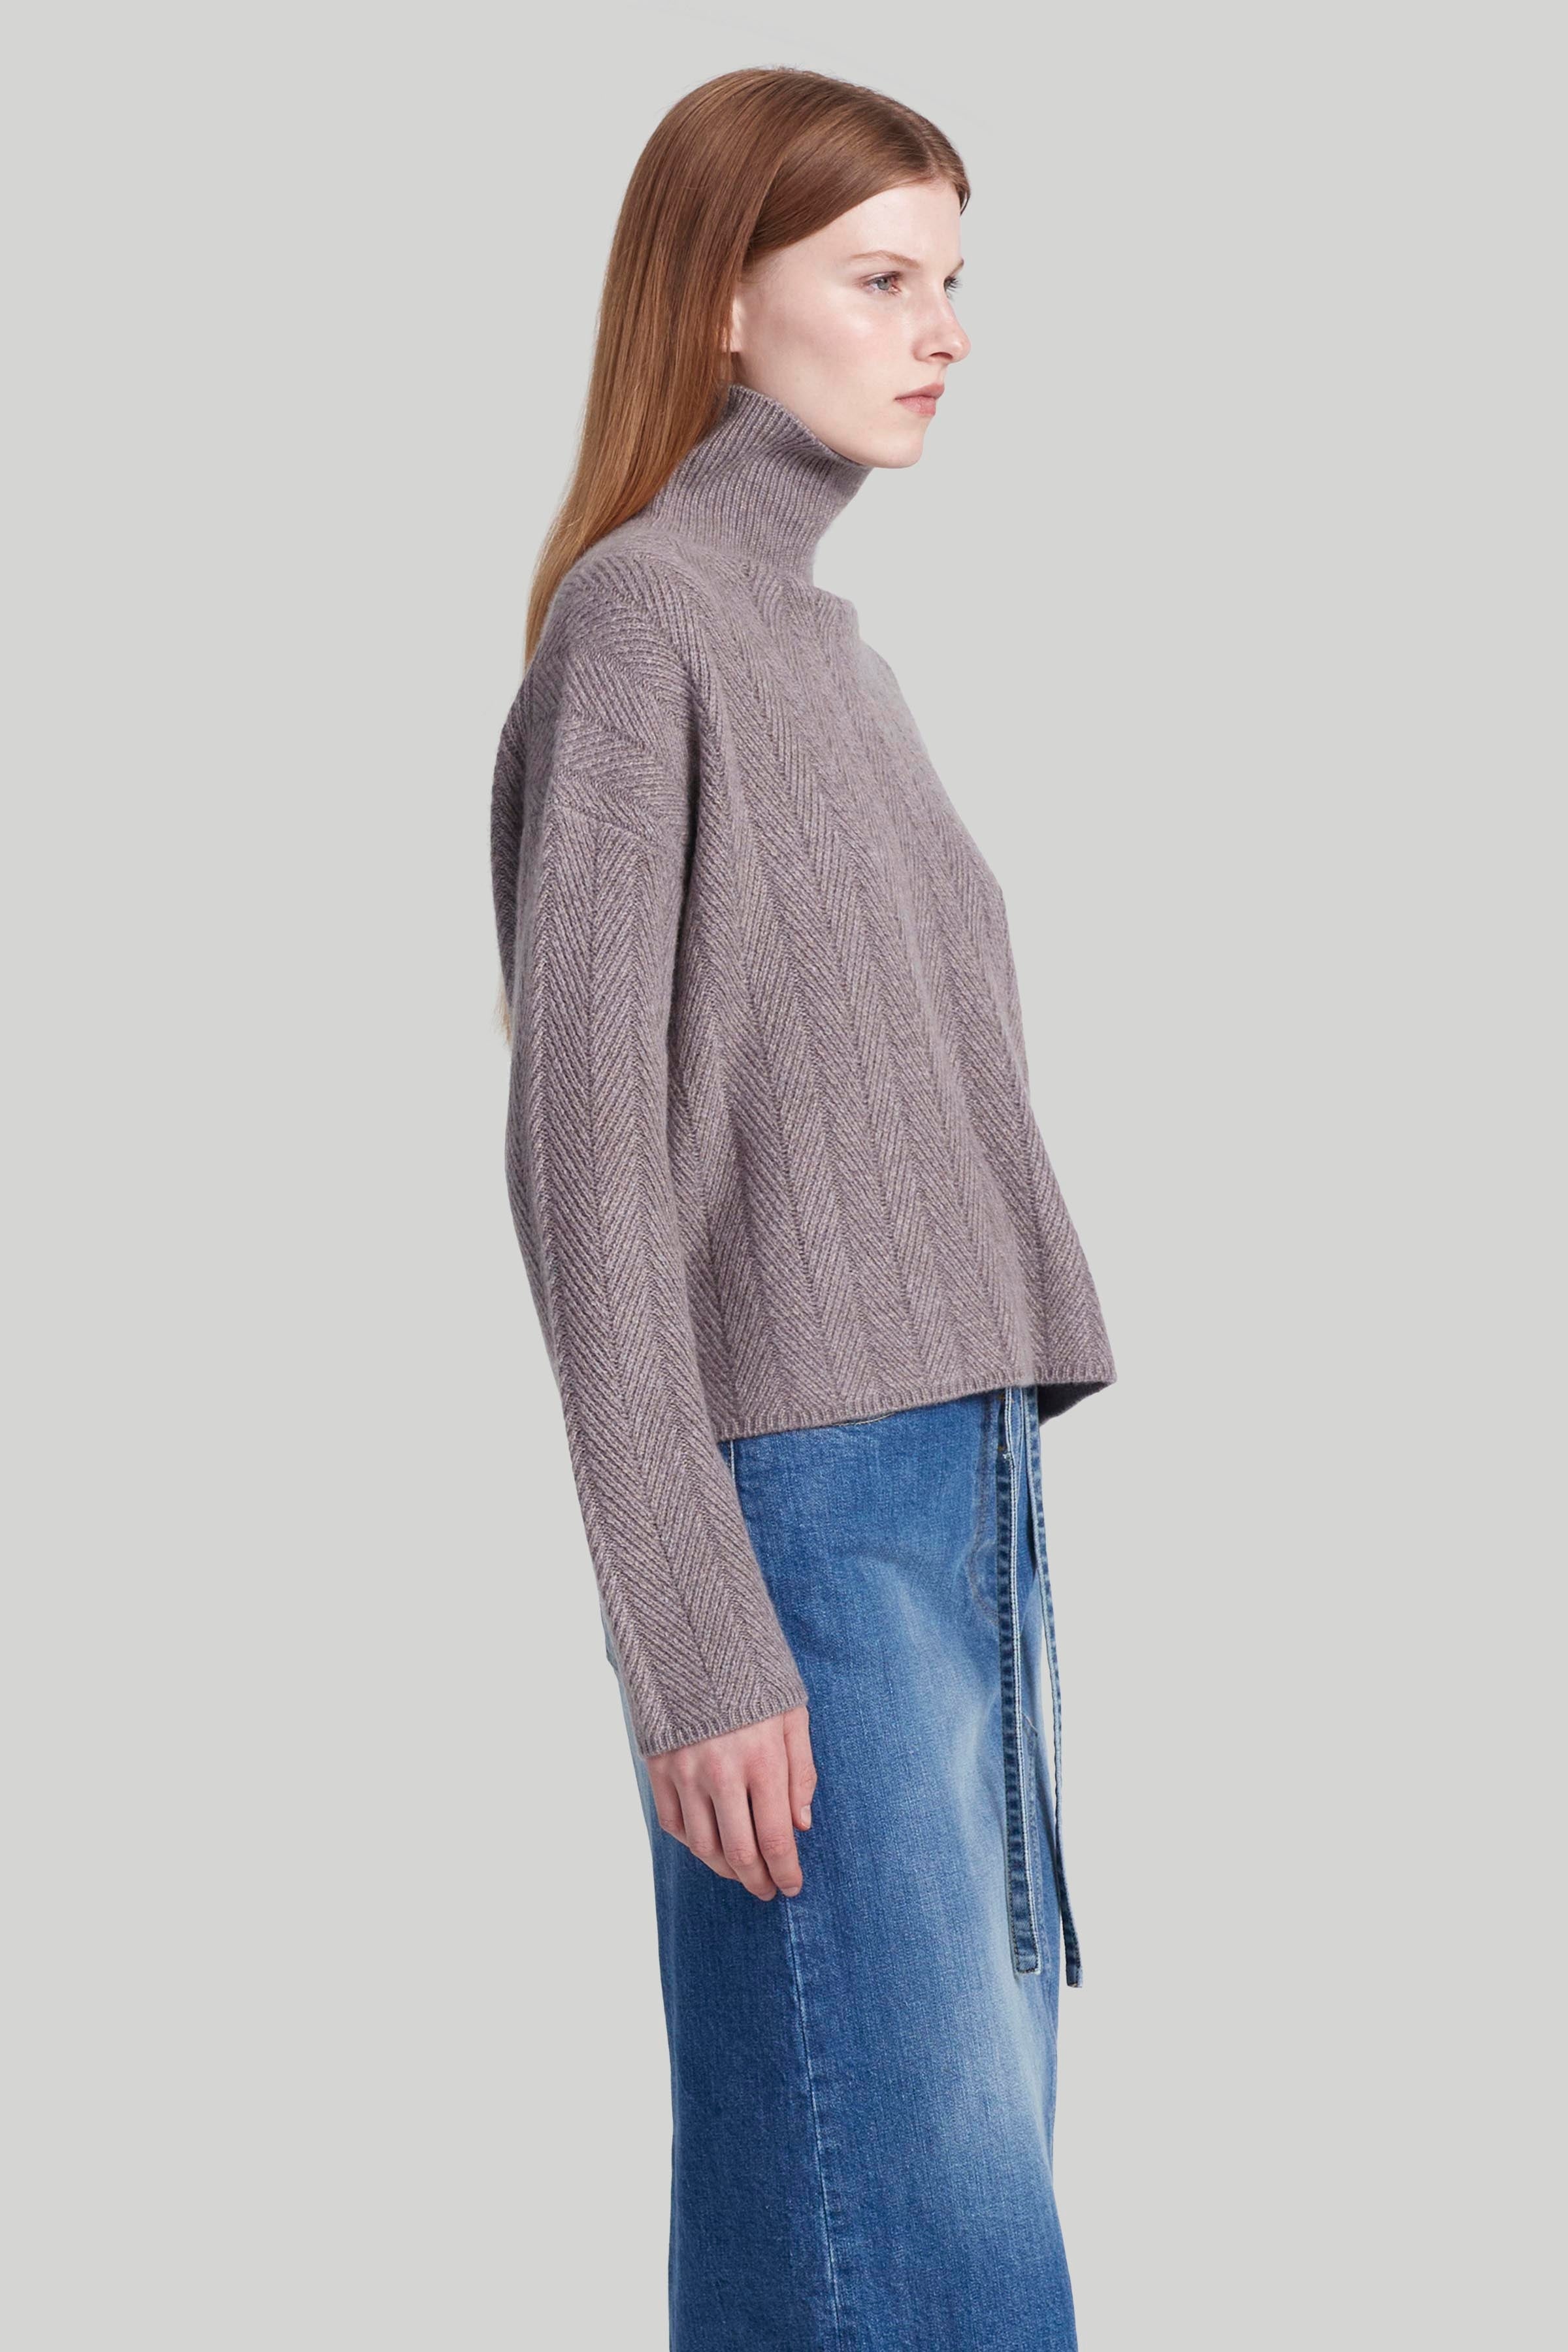 'TERENCE' SWEATER - 3